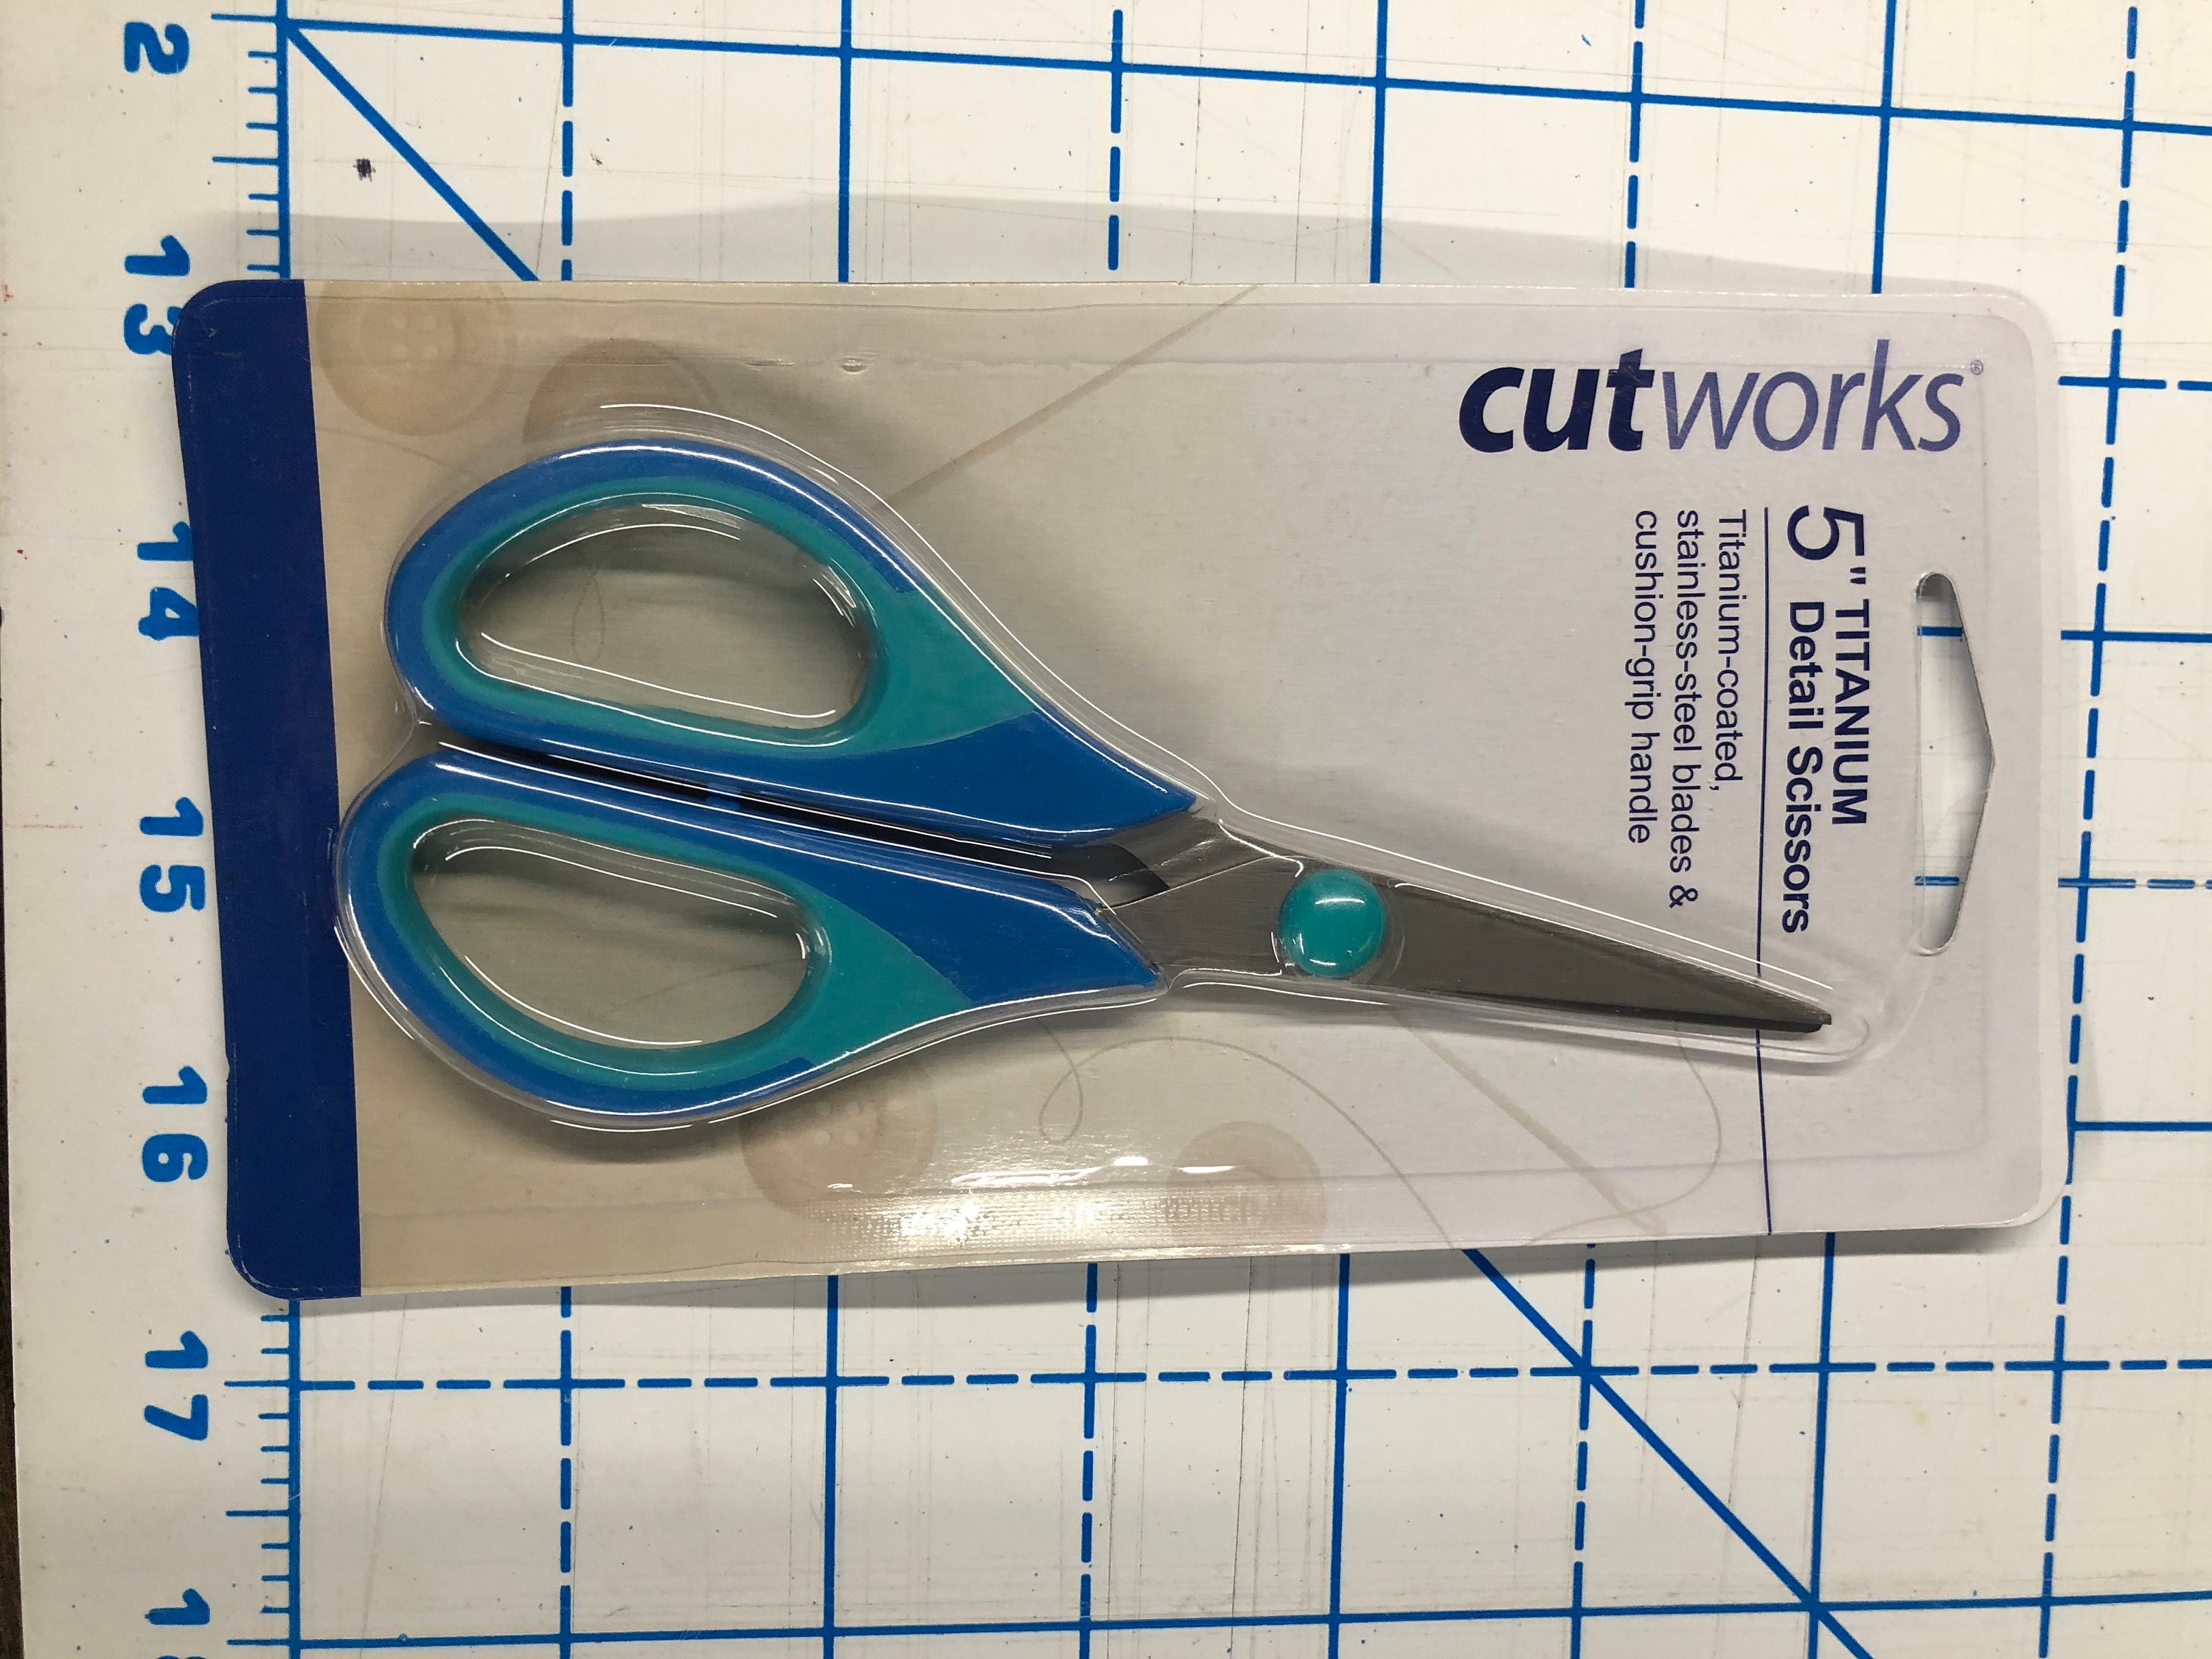 Sooz Custom Clothing - 5 pack of scissors, perfect gift for Christmas. 5  pairs for £11.99 (cheesy packaging but very good quality scissors)